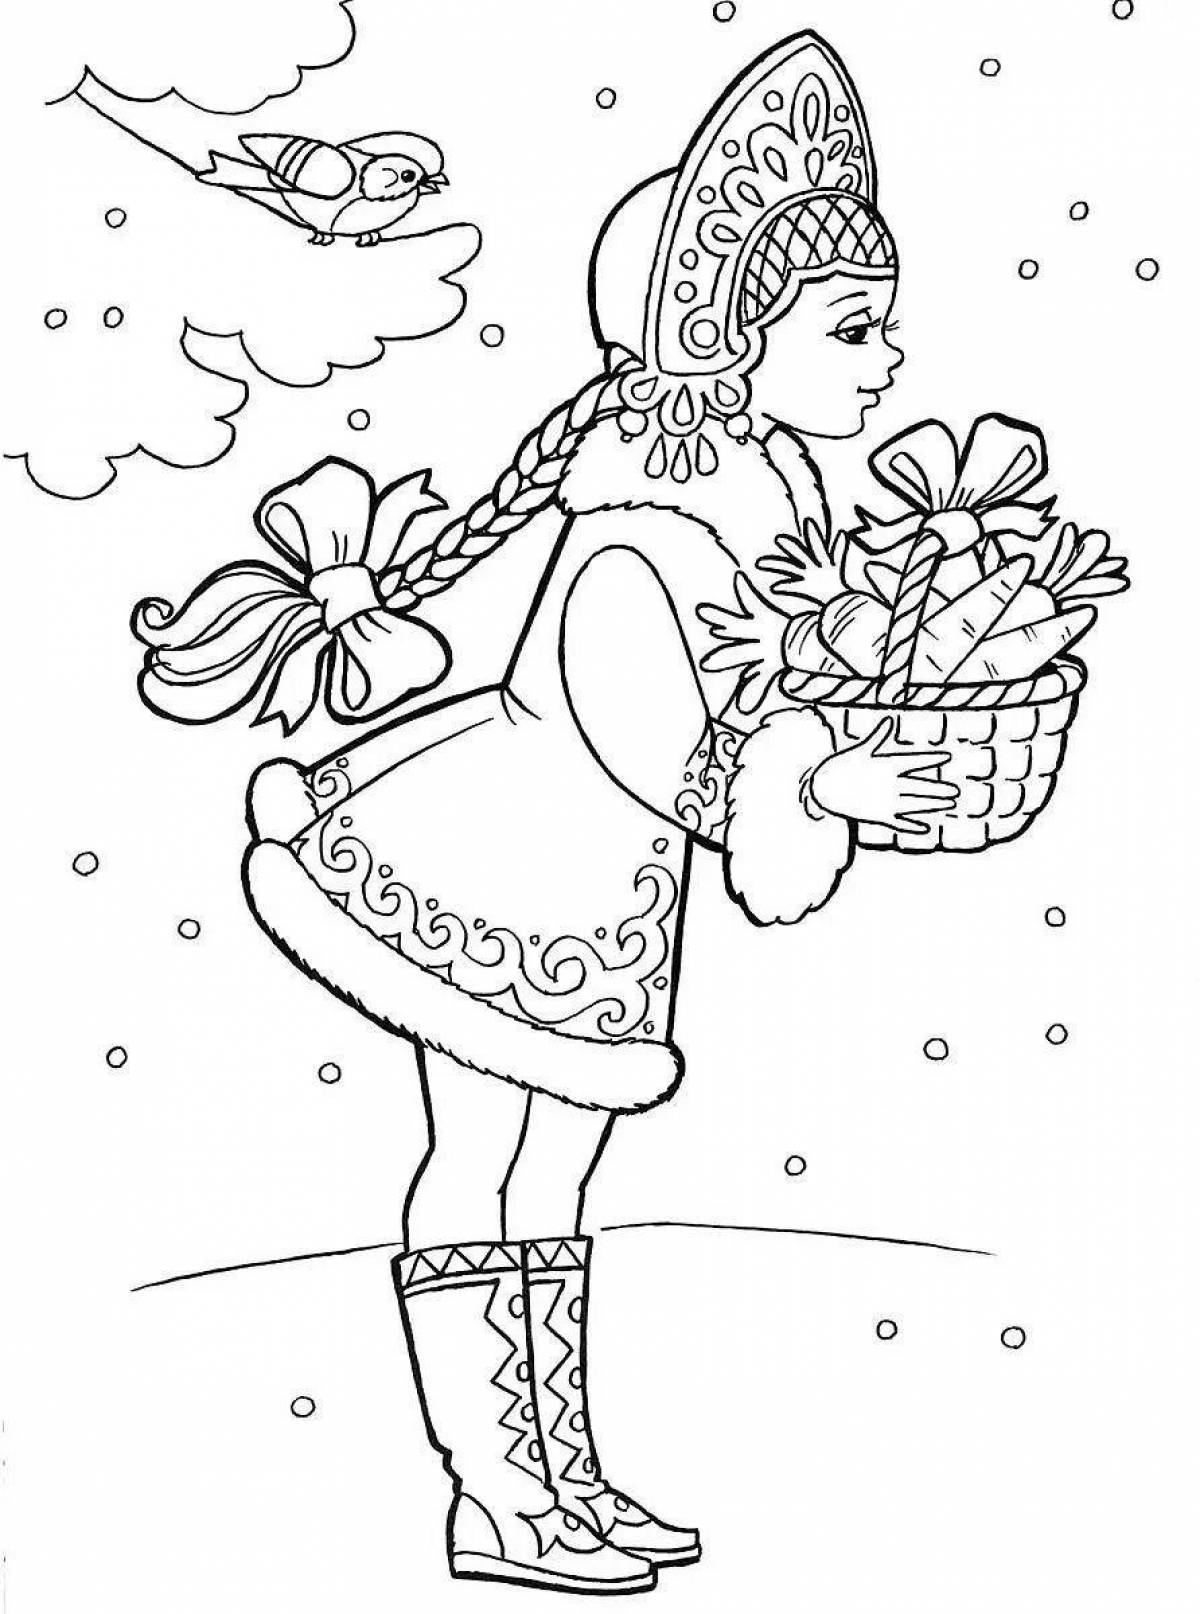 Delightful coloring drawing of a snow maiden